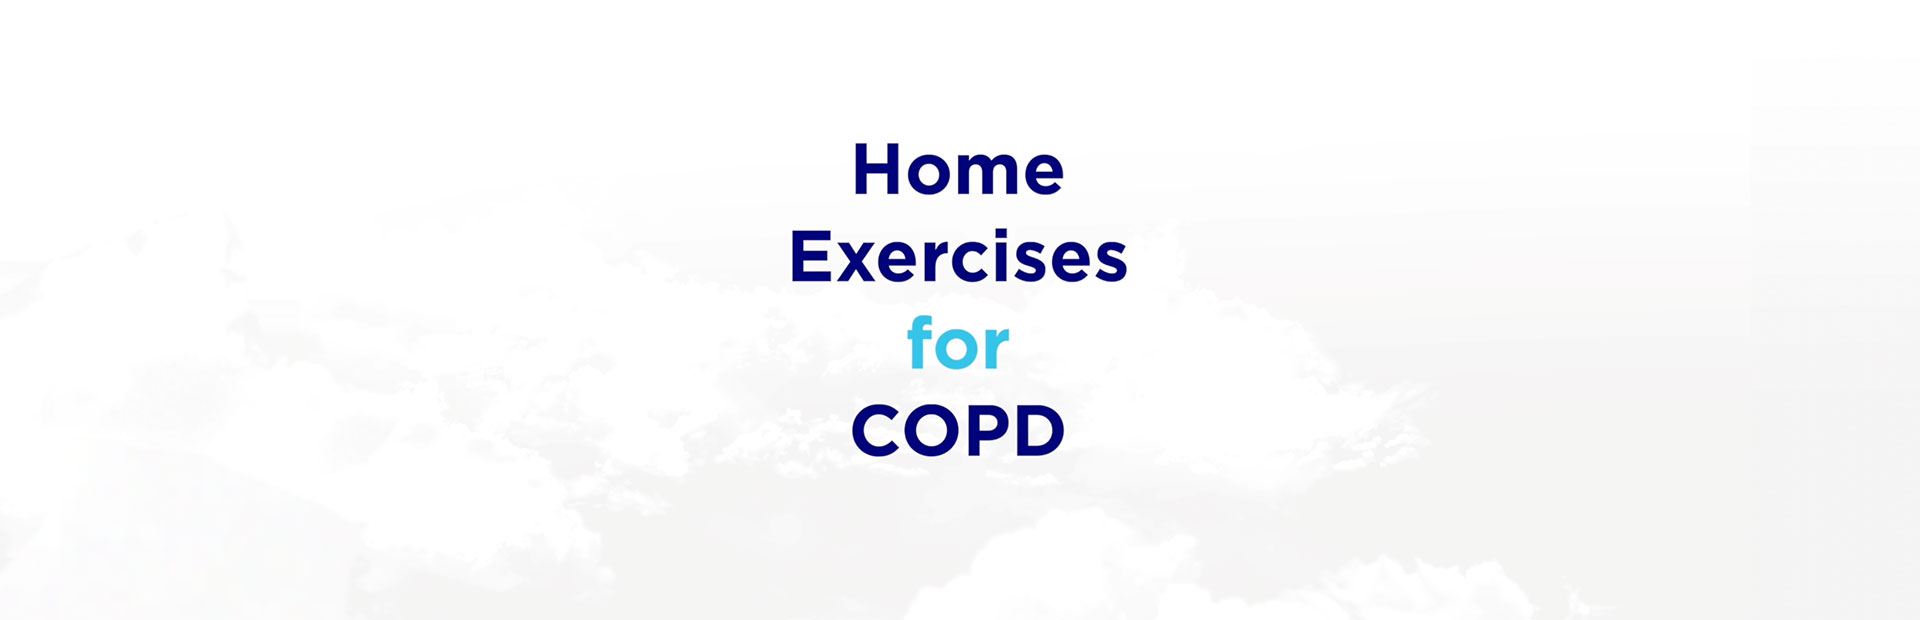 Home Exercises for COPD